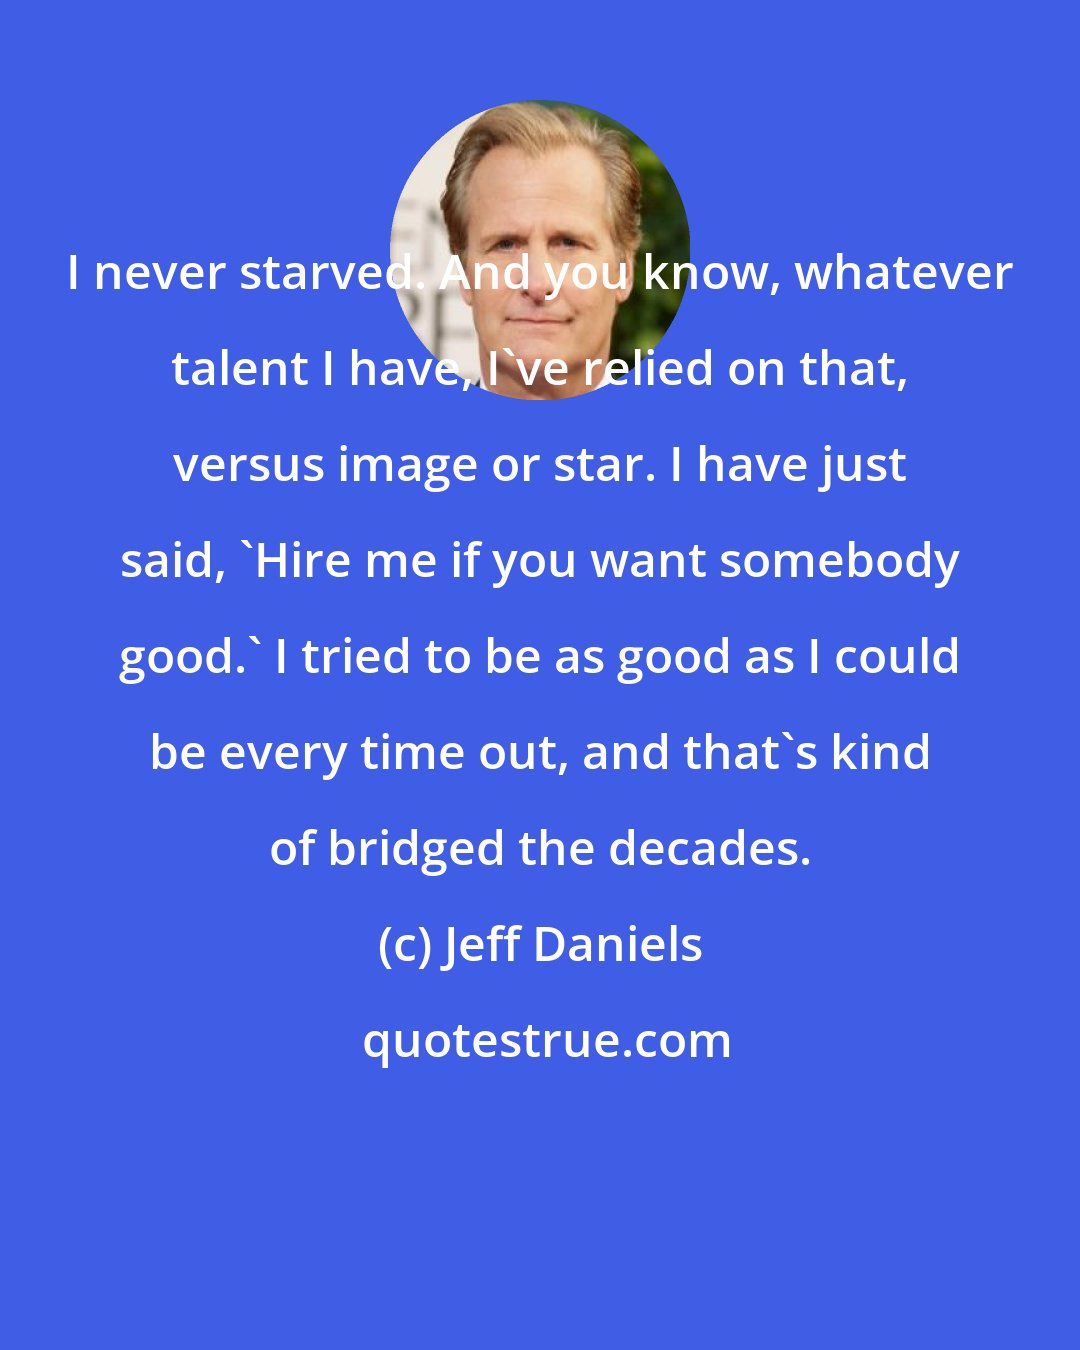 Jeff Daniels: I never starved. And you know, whatever talent I have, I've relied on that, versus image or star. I have just said, 'Hire me if you want somebody good.' I tried to be as good as I could be every time out, and that's kind of bridged the decades.